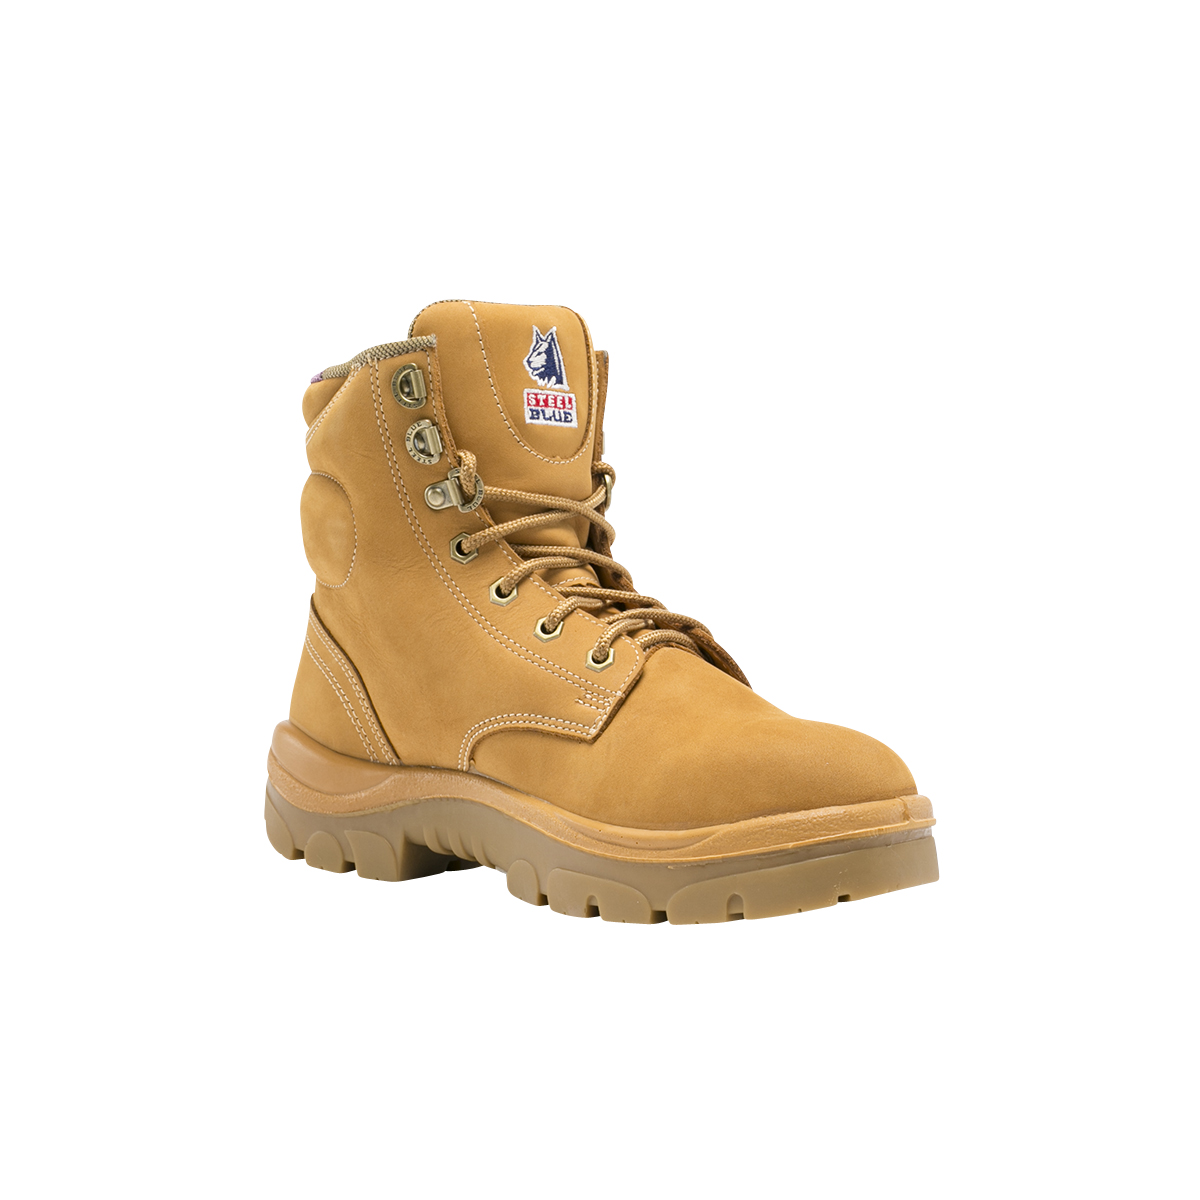 BOOT ARGYLE LADIES WHEAT S10 -ANKLE LACE UP WHEAT